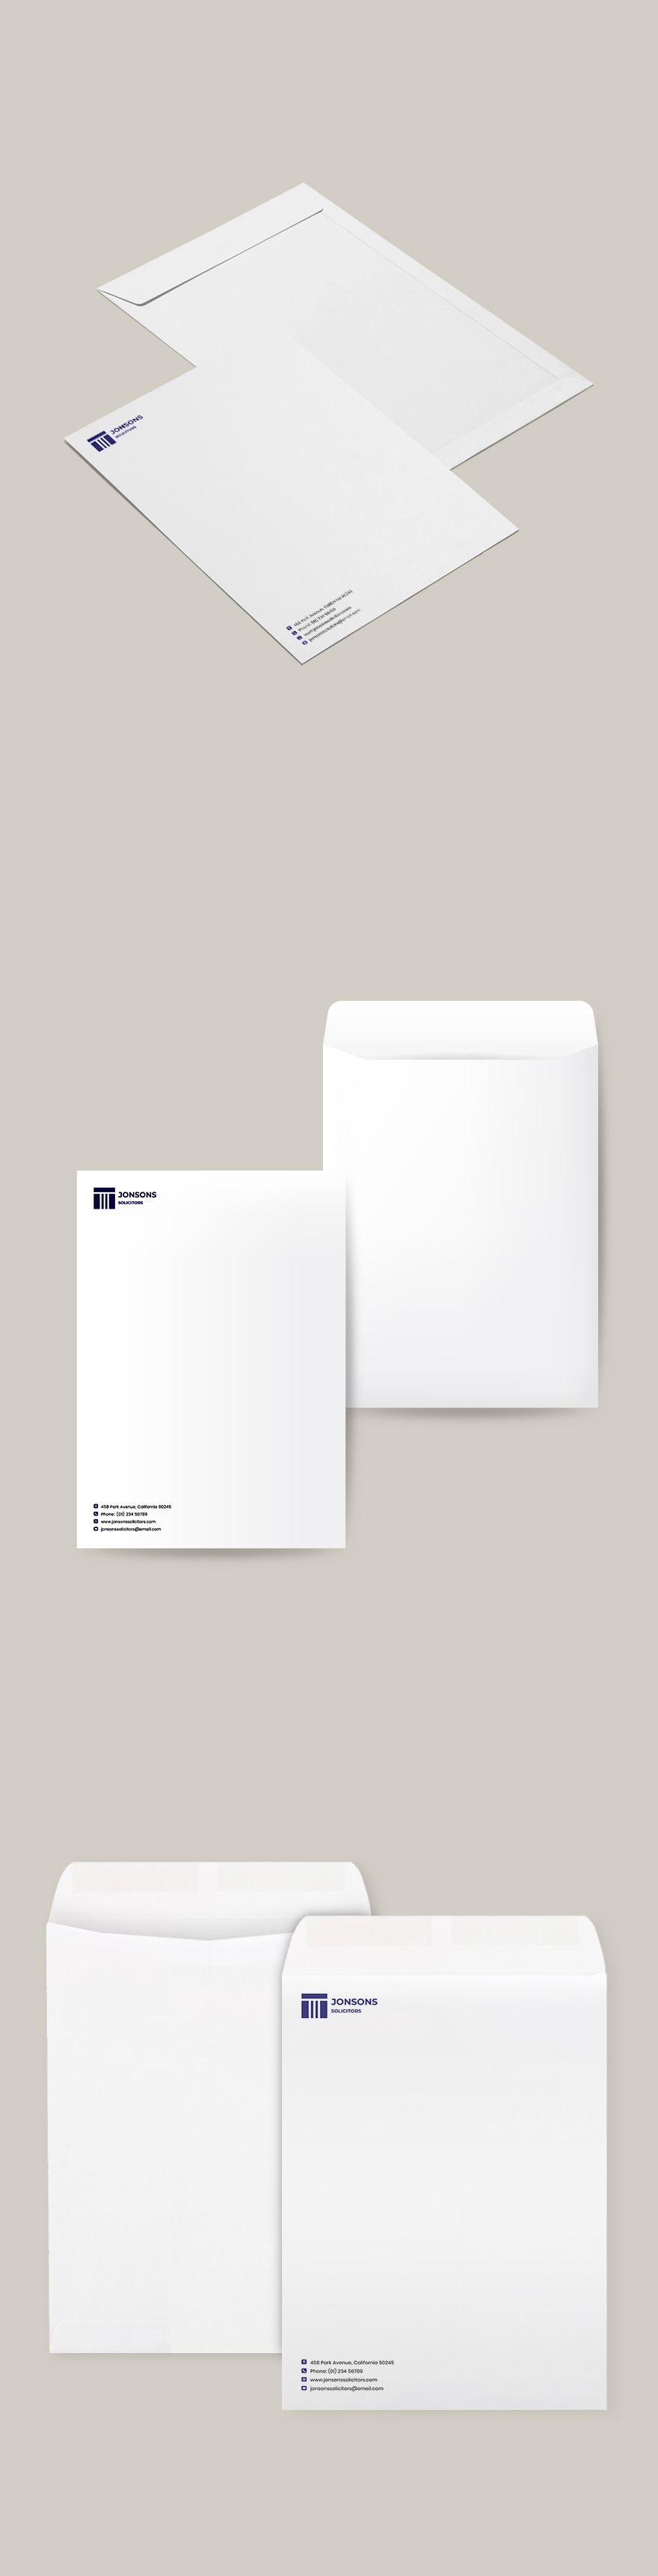 Law Firm Envelope Template